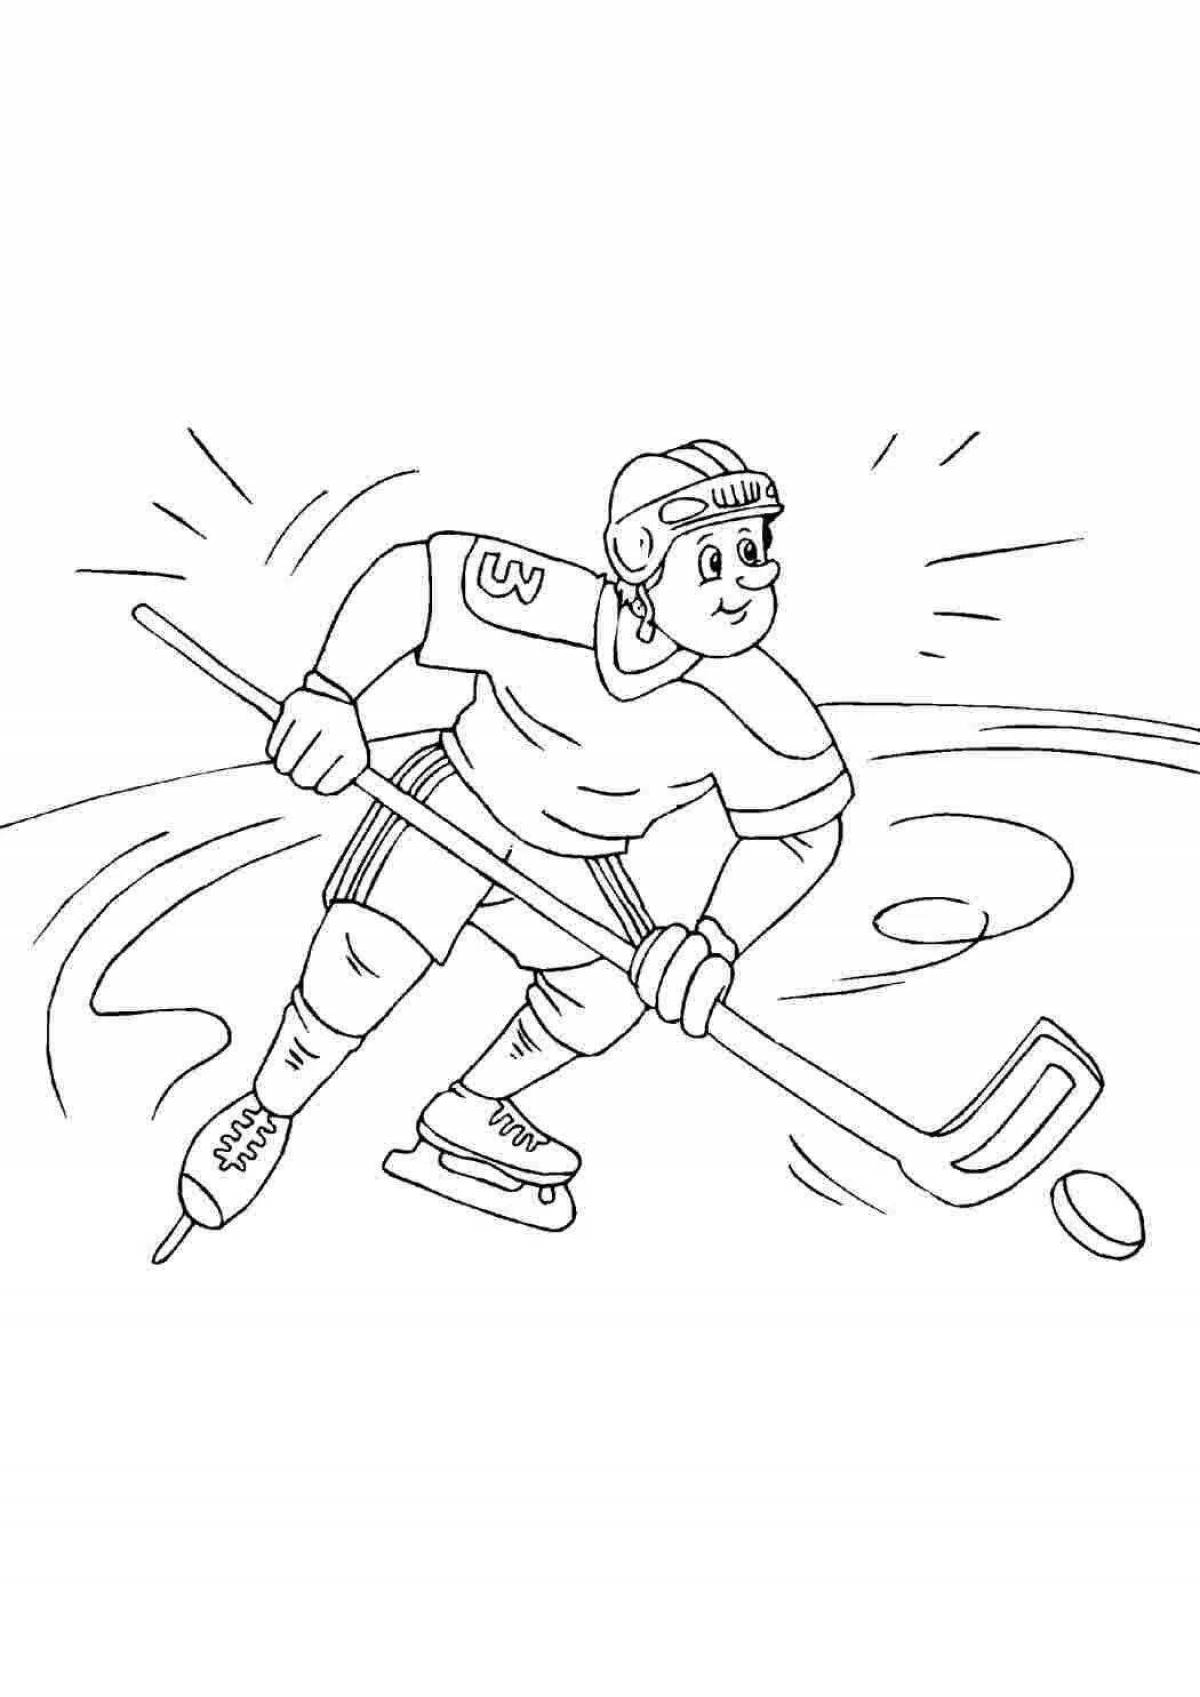 Glowing winter sports coloring book for preschoolers